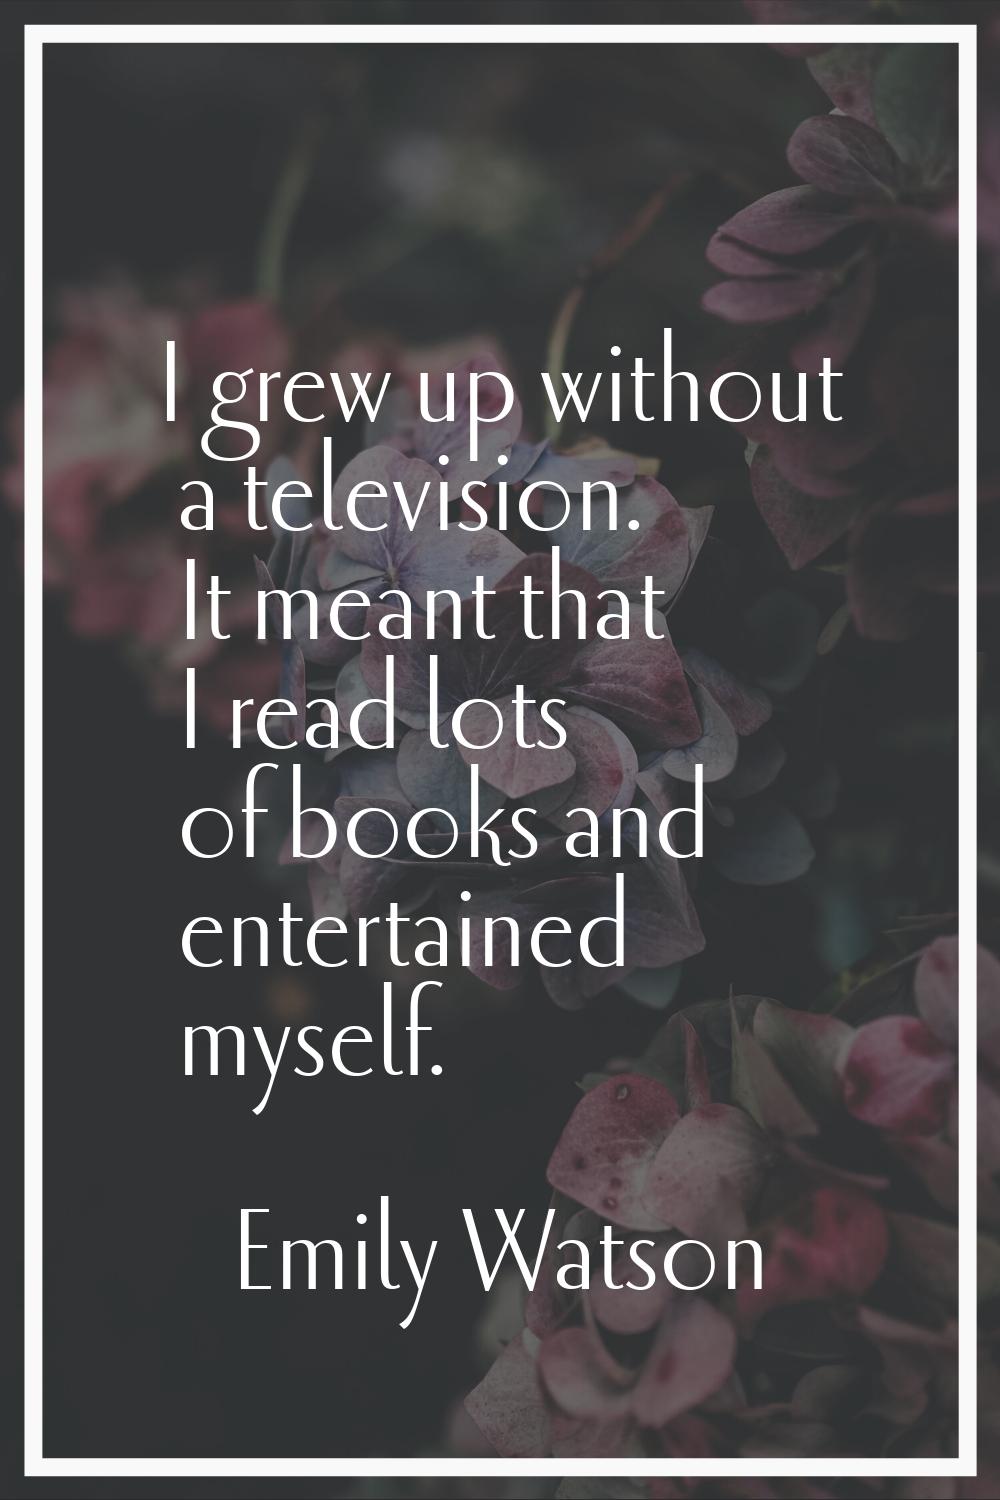 I grew up without a television. It meant that I read lots of books and entertained myself.